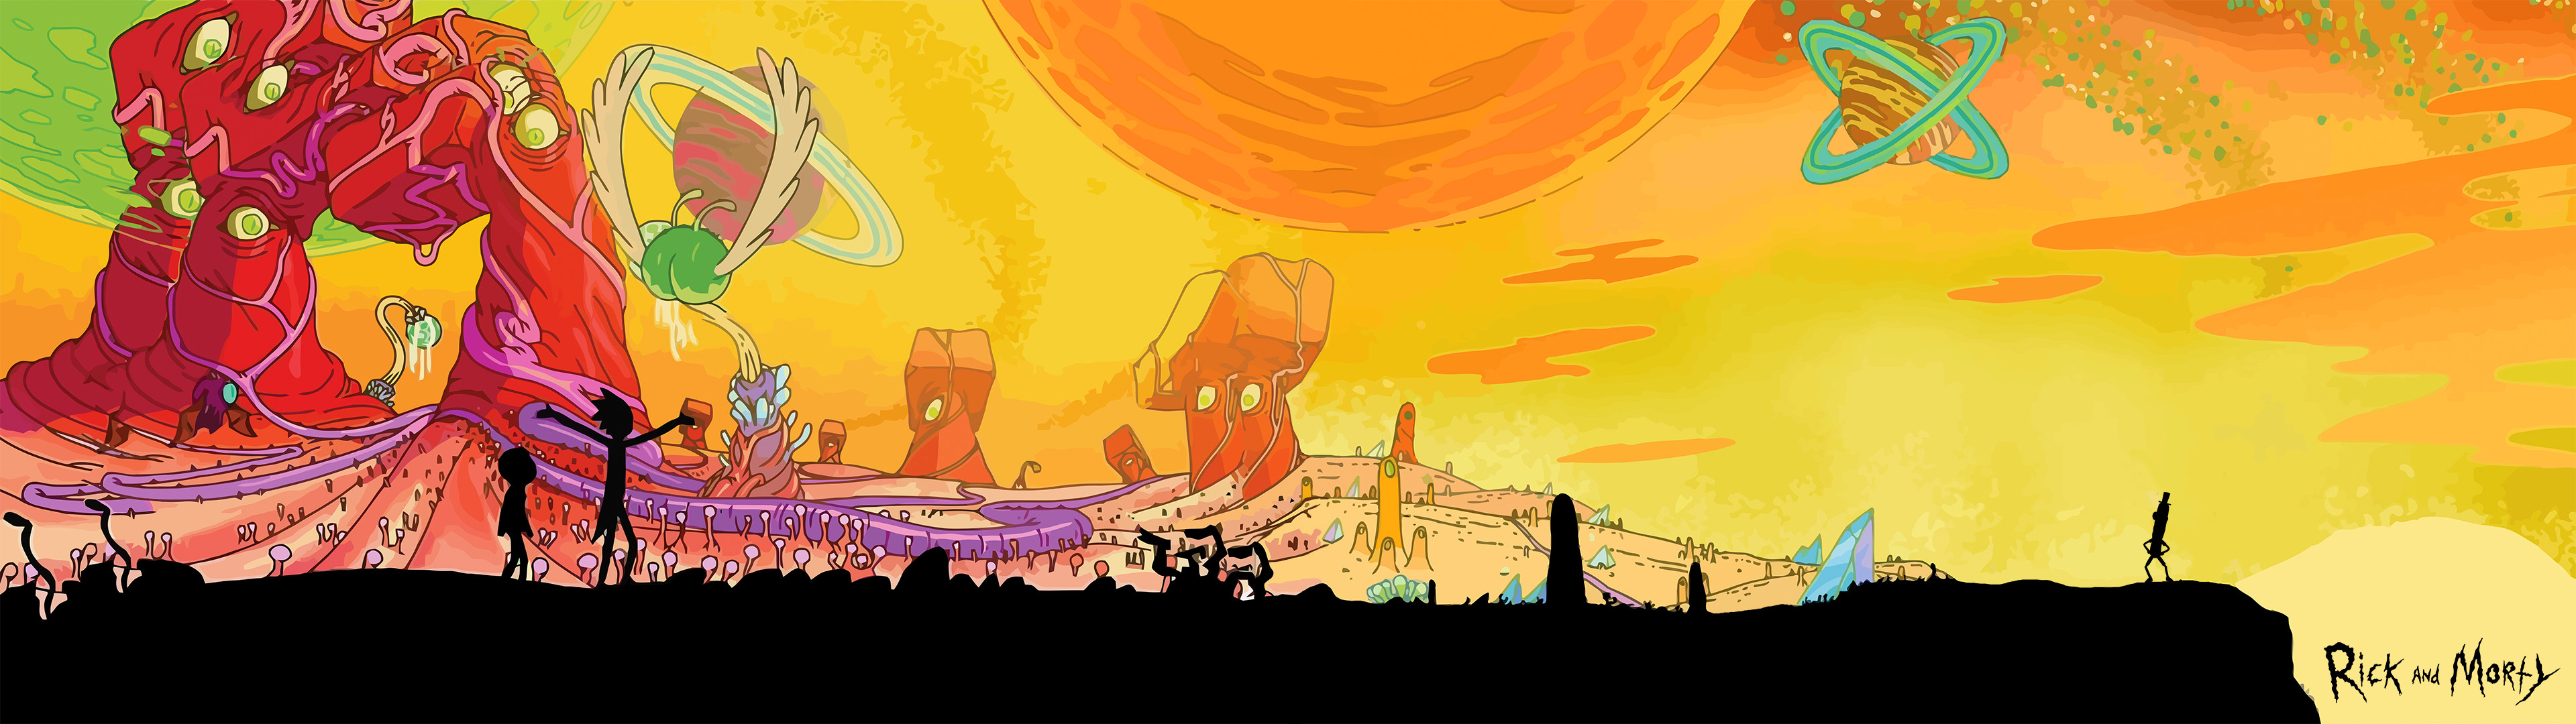 3840x1080 []Rick and Morty Dual Screen wallpaperDual ...